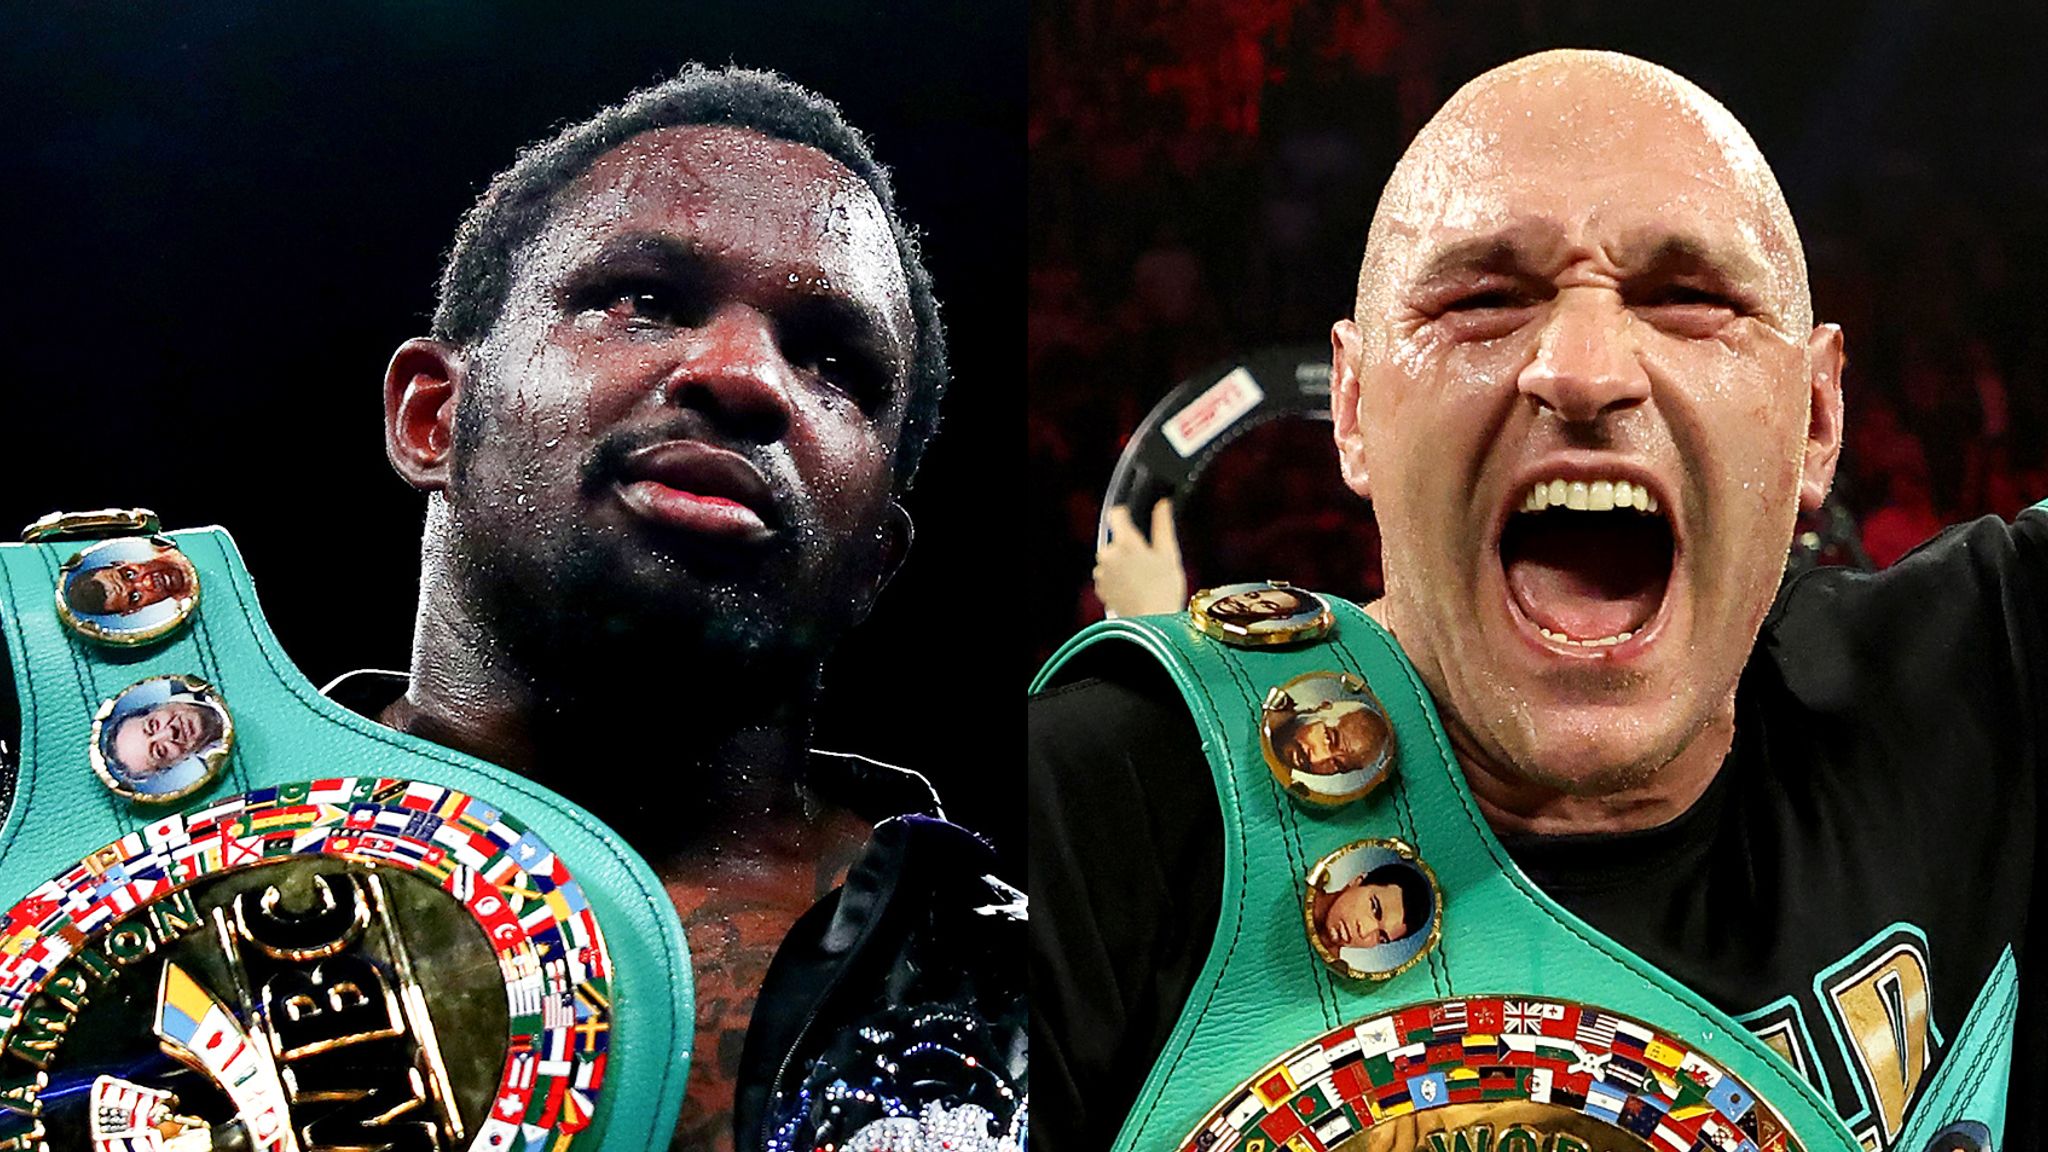 Tyson Fury vs Dillian Whyte WBC have made clear that it has to happen, says Eddie Hearn Boxing News Sky Sports